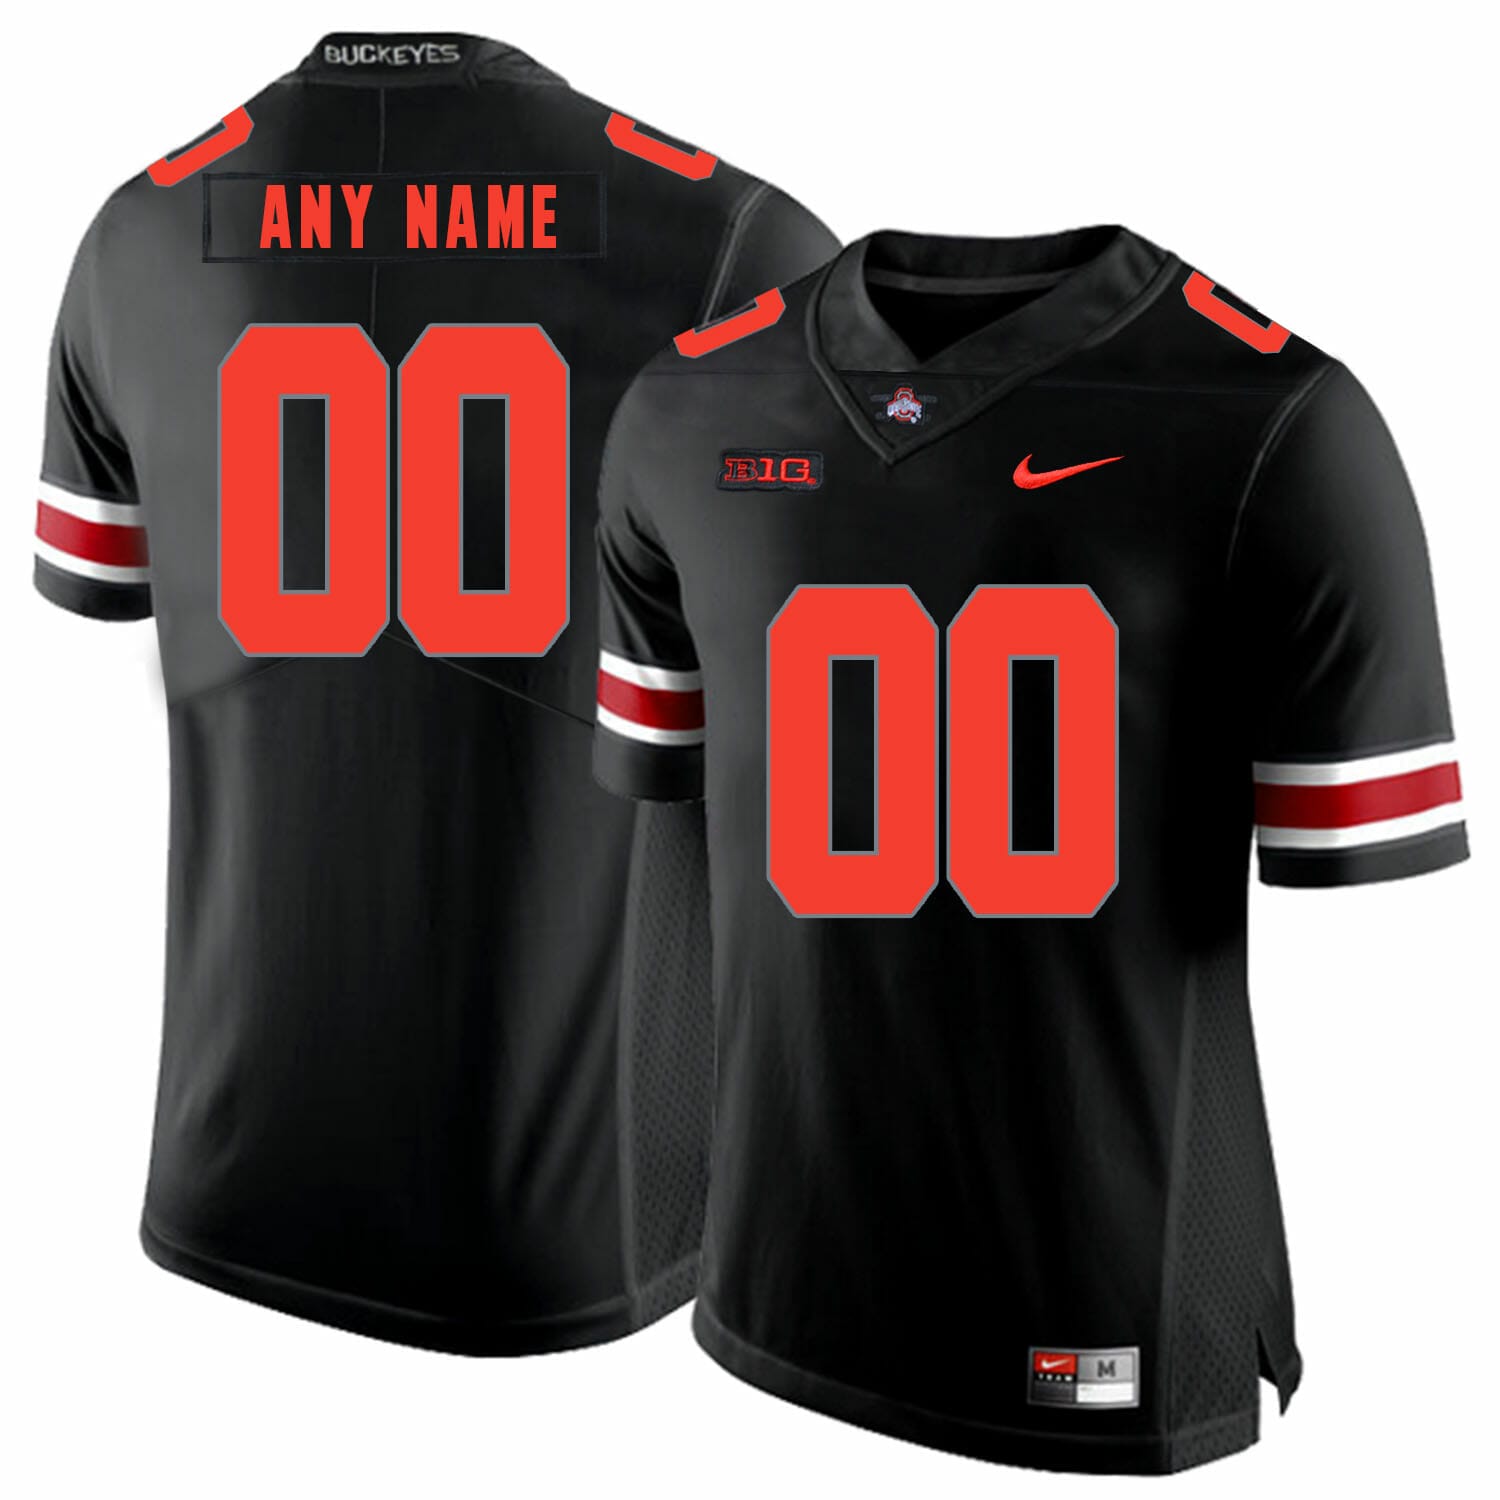 Ohio State Buckeyes Player Custom Jersey - All Stitched